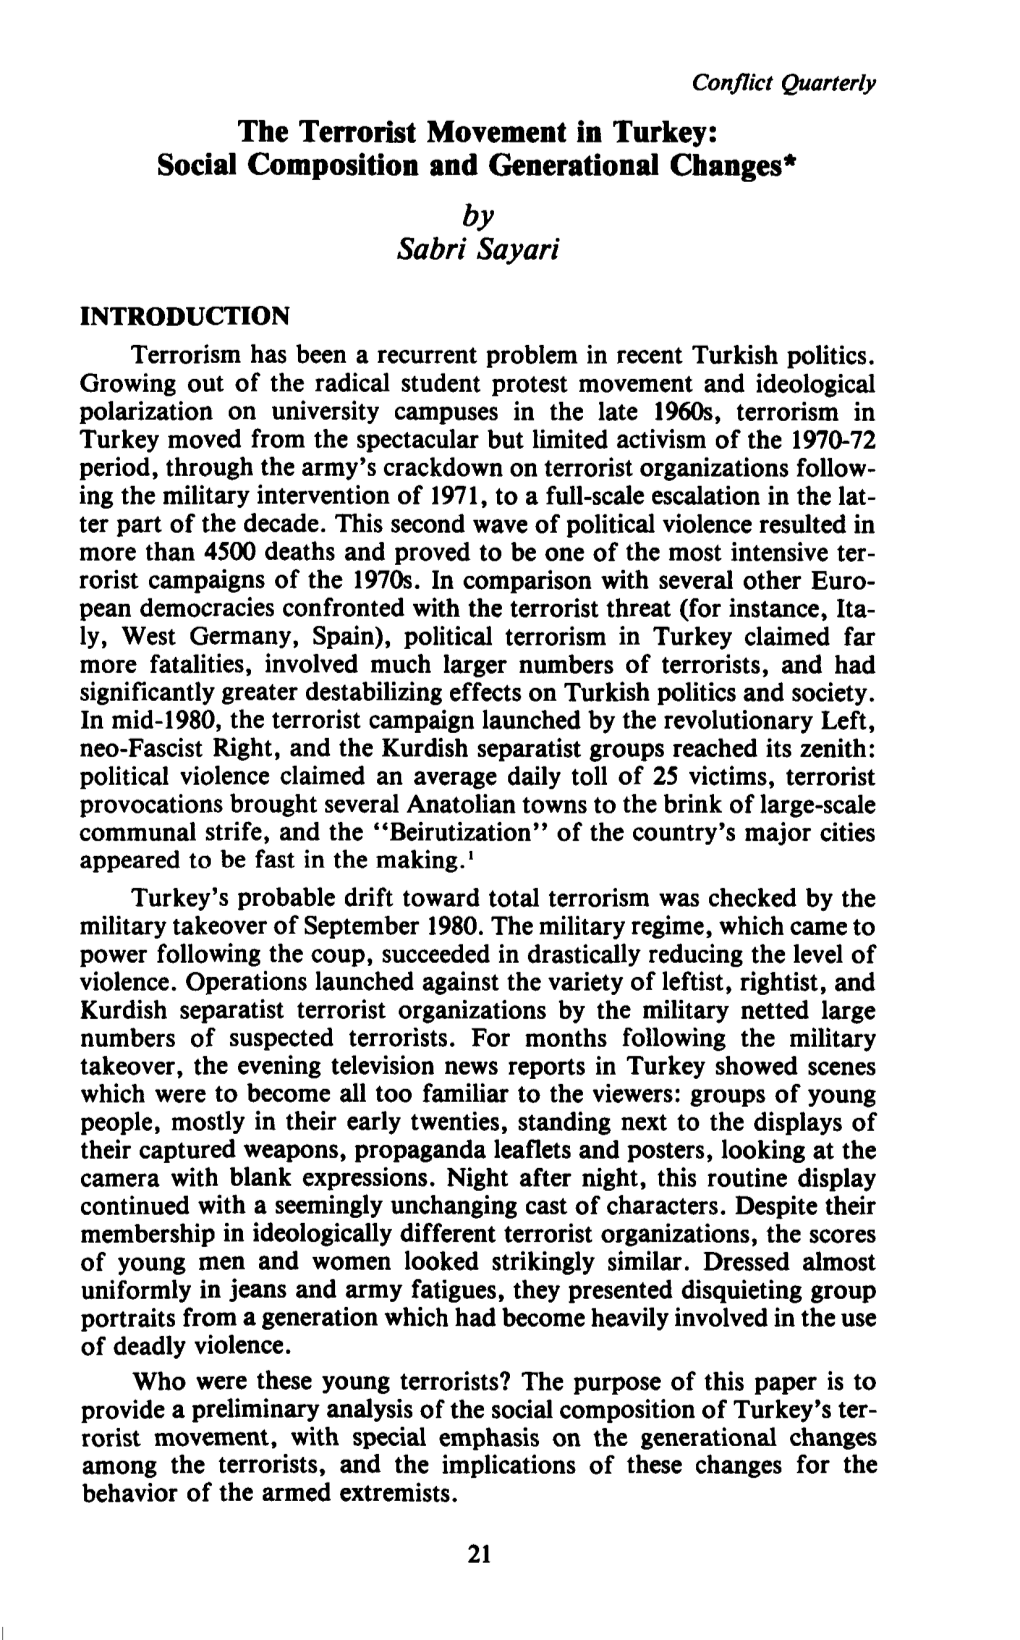 The Terrorist Movement in Turkey: Social Composition and Generational Changes* by Sabri Sayari